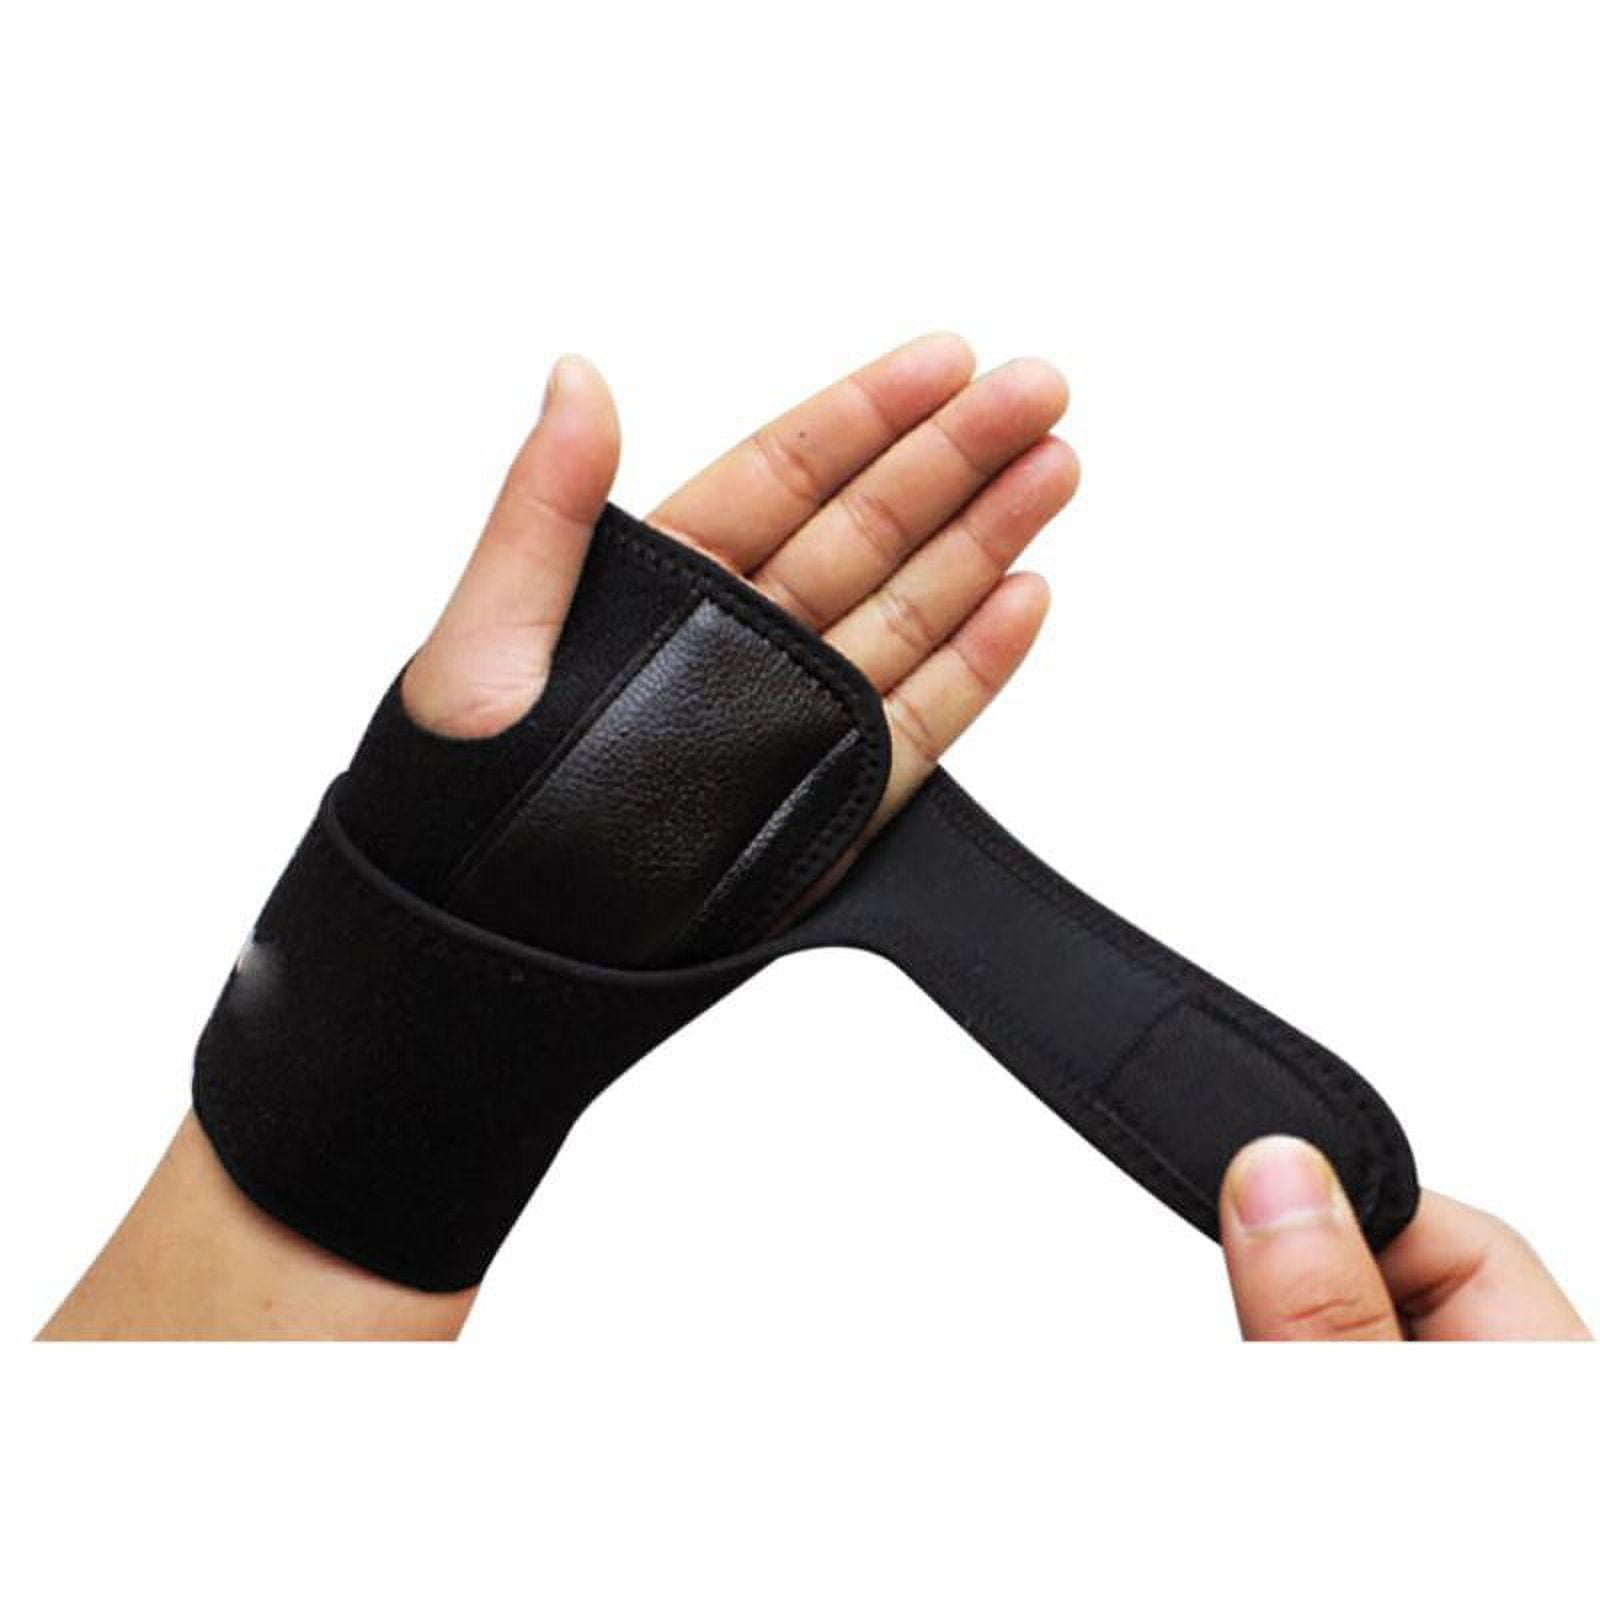 Top Five Gifts that Provide Relief for Carpal Tunnel Sufferers